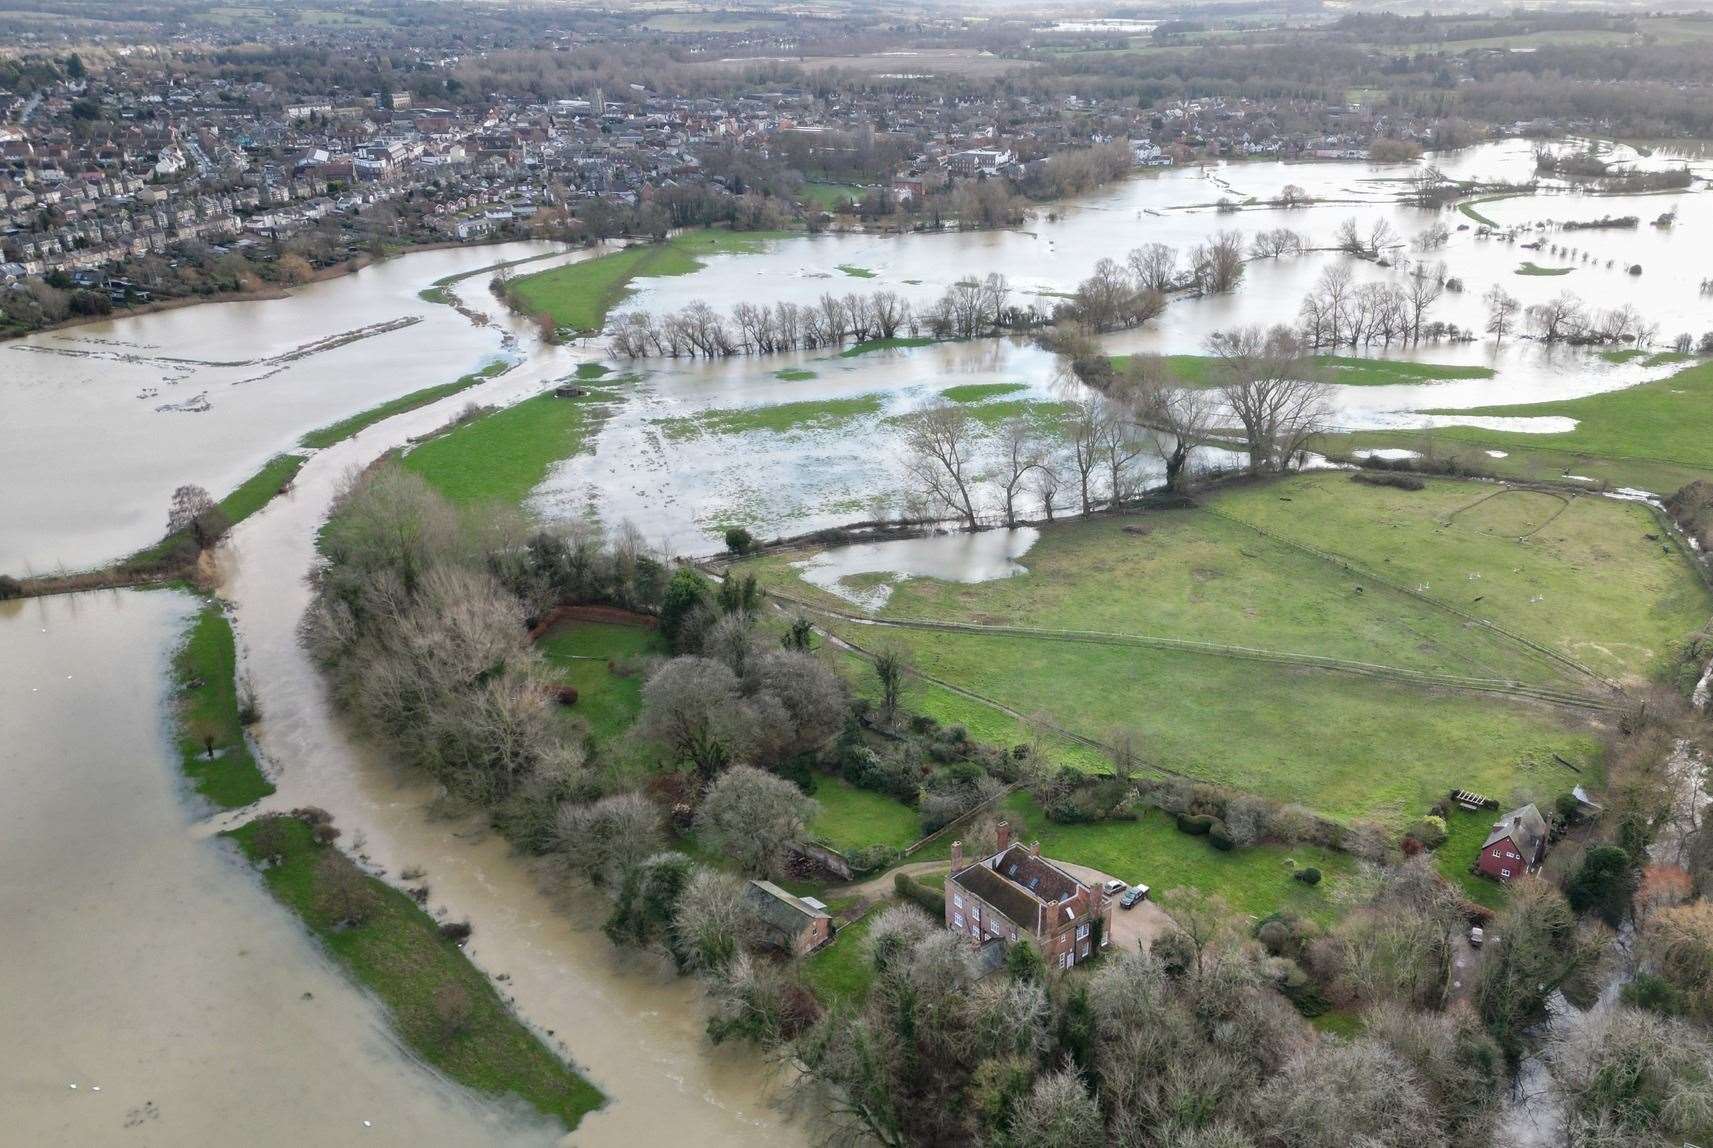 The banks of the River Stour may breach near low-lying land due to the heavy rain. Picture: Andy Rushworth